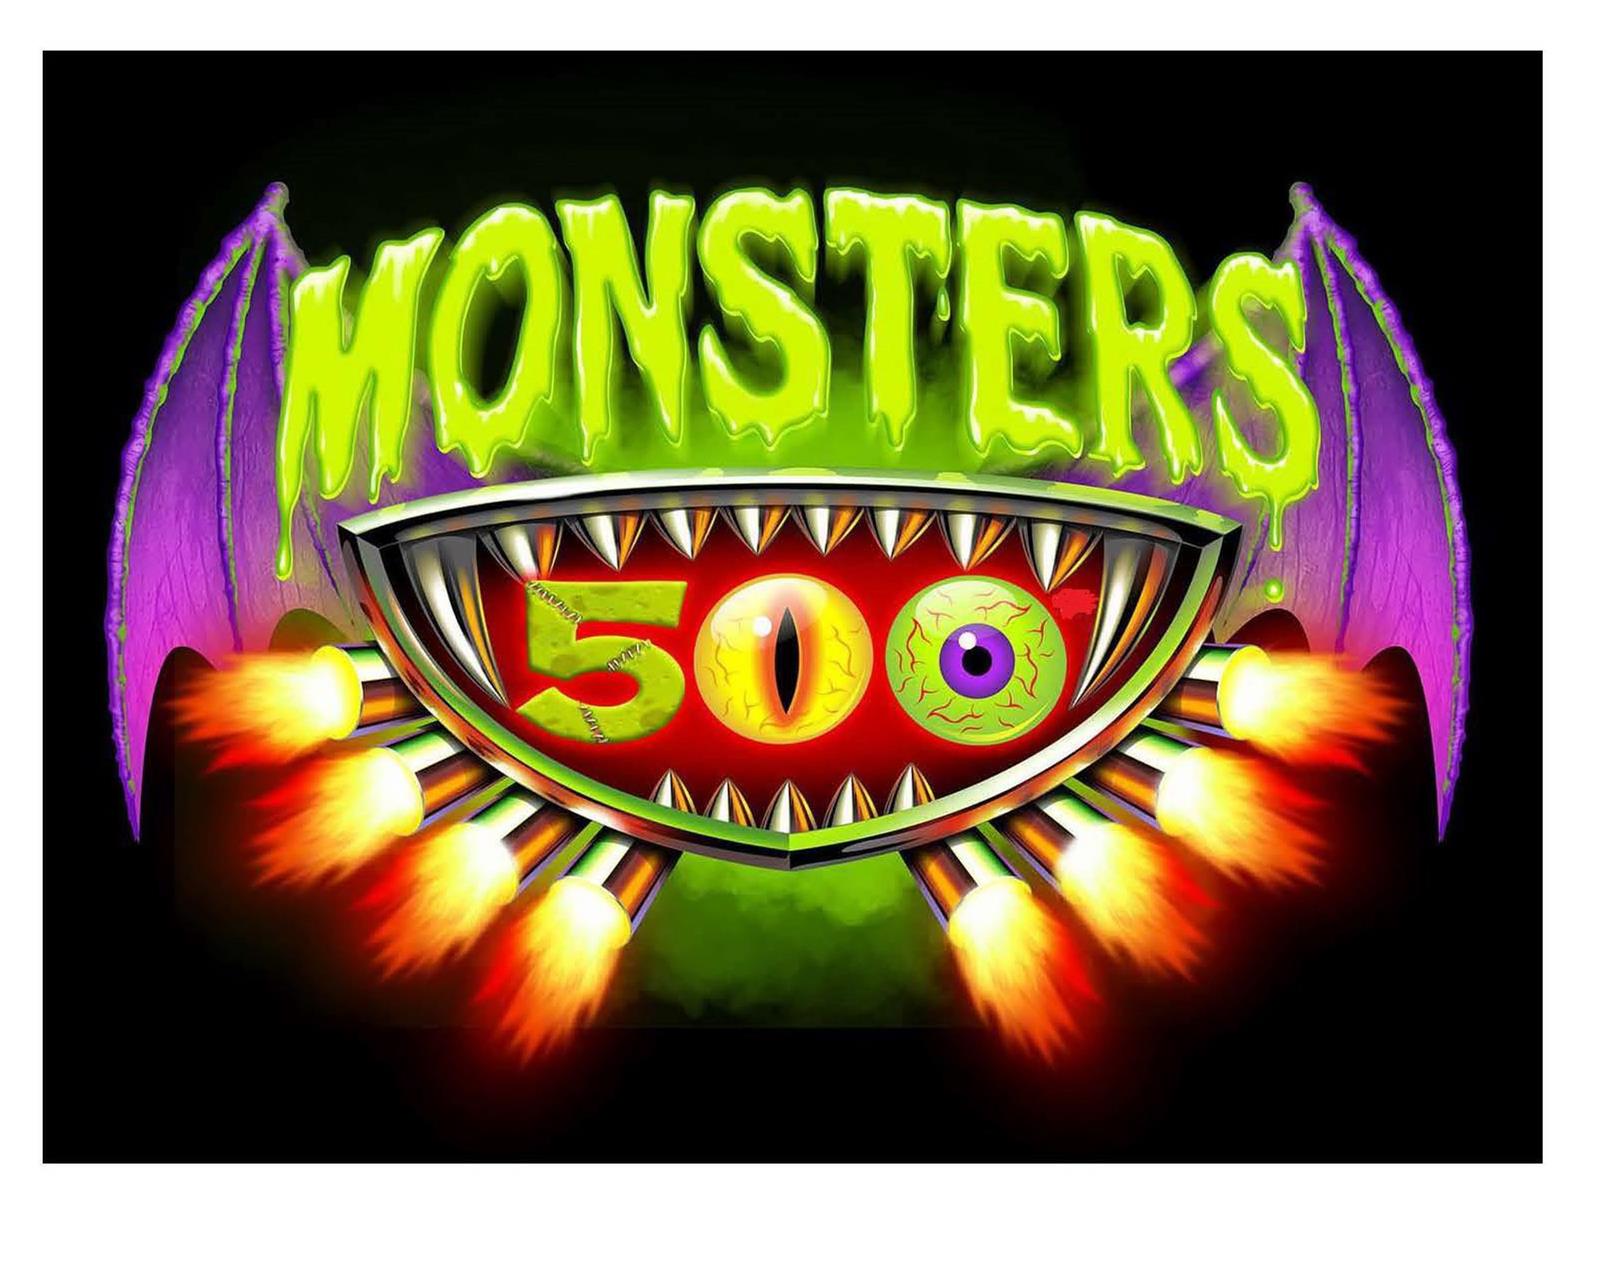  MONSTERS 500